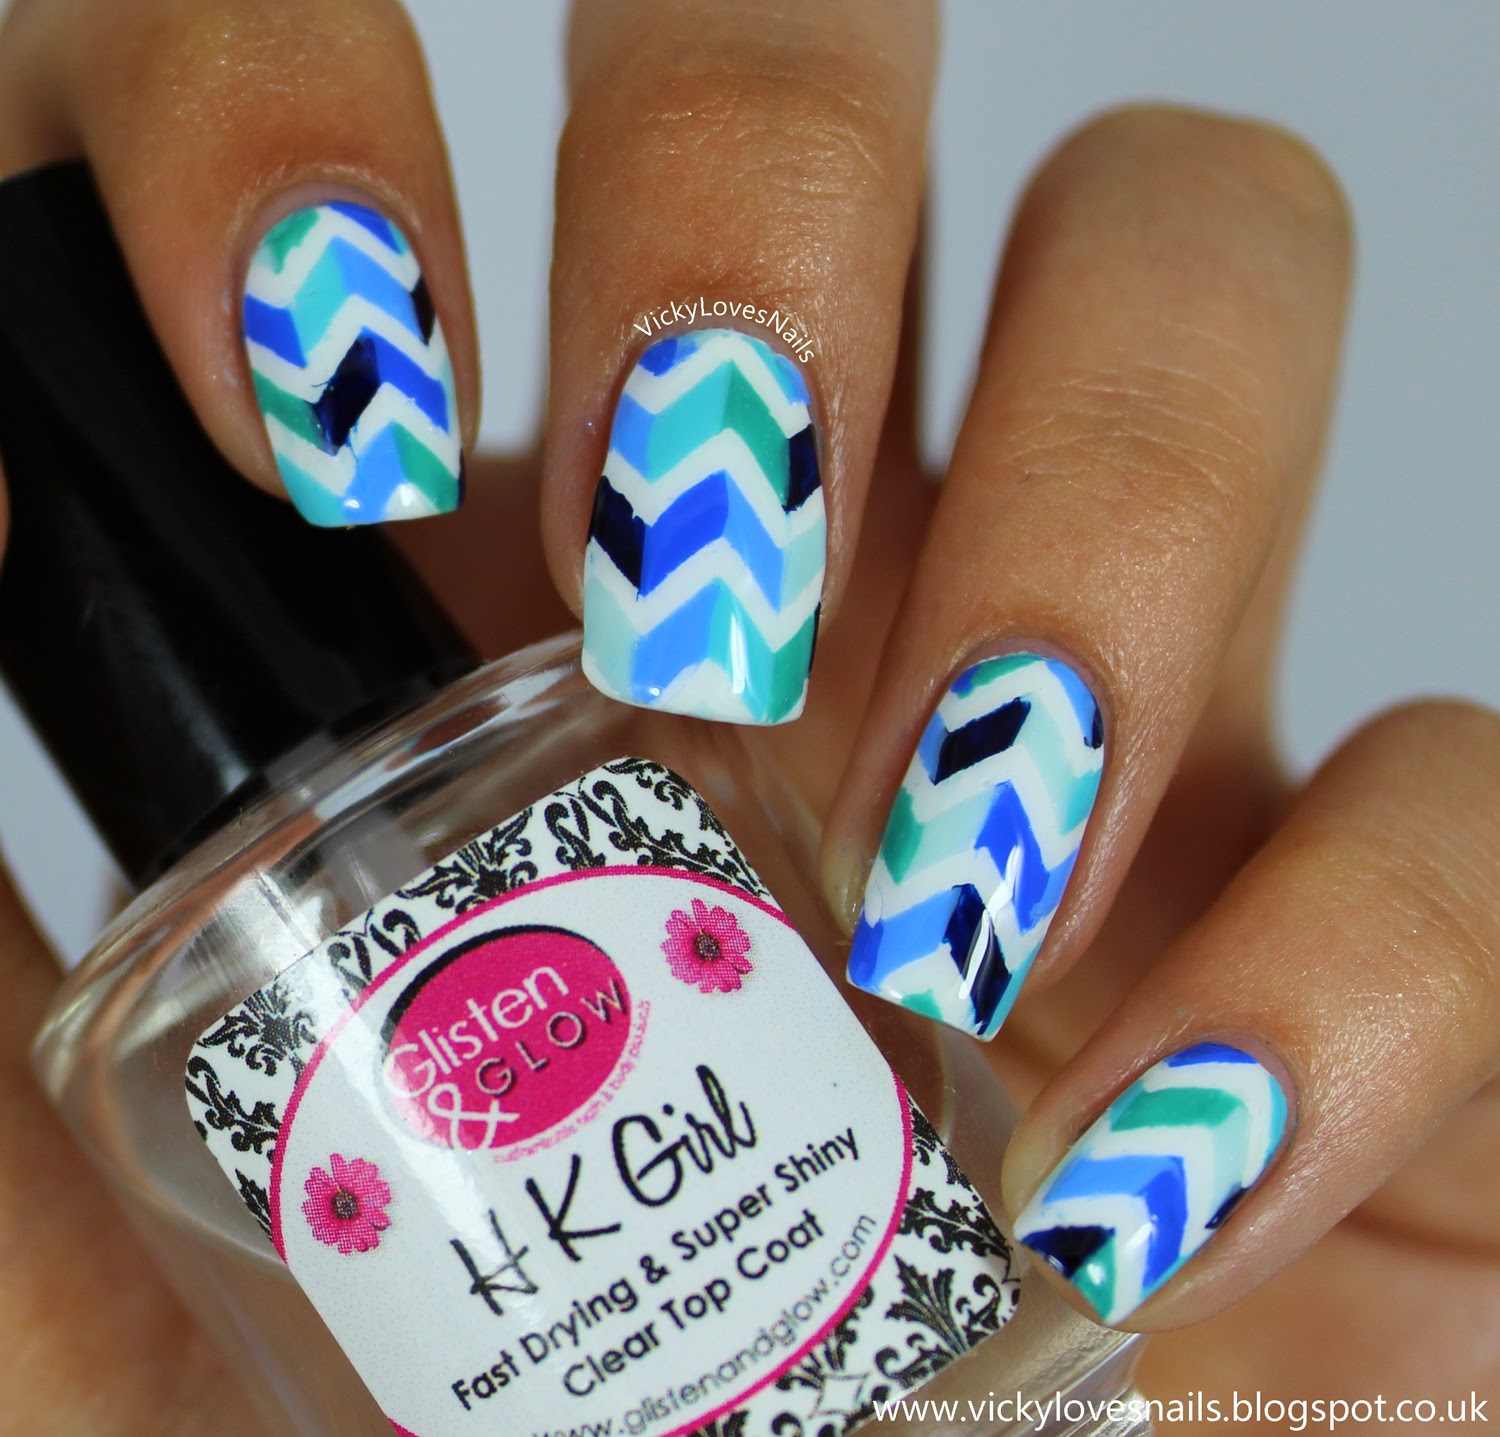 Vicky Loves Nails!: Life In Lacquer's Nail Art Challenge - Blue.